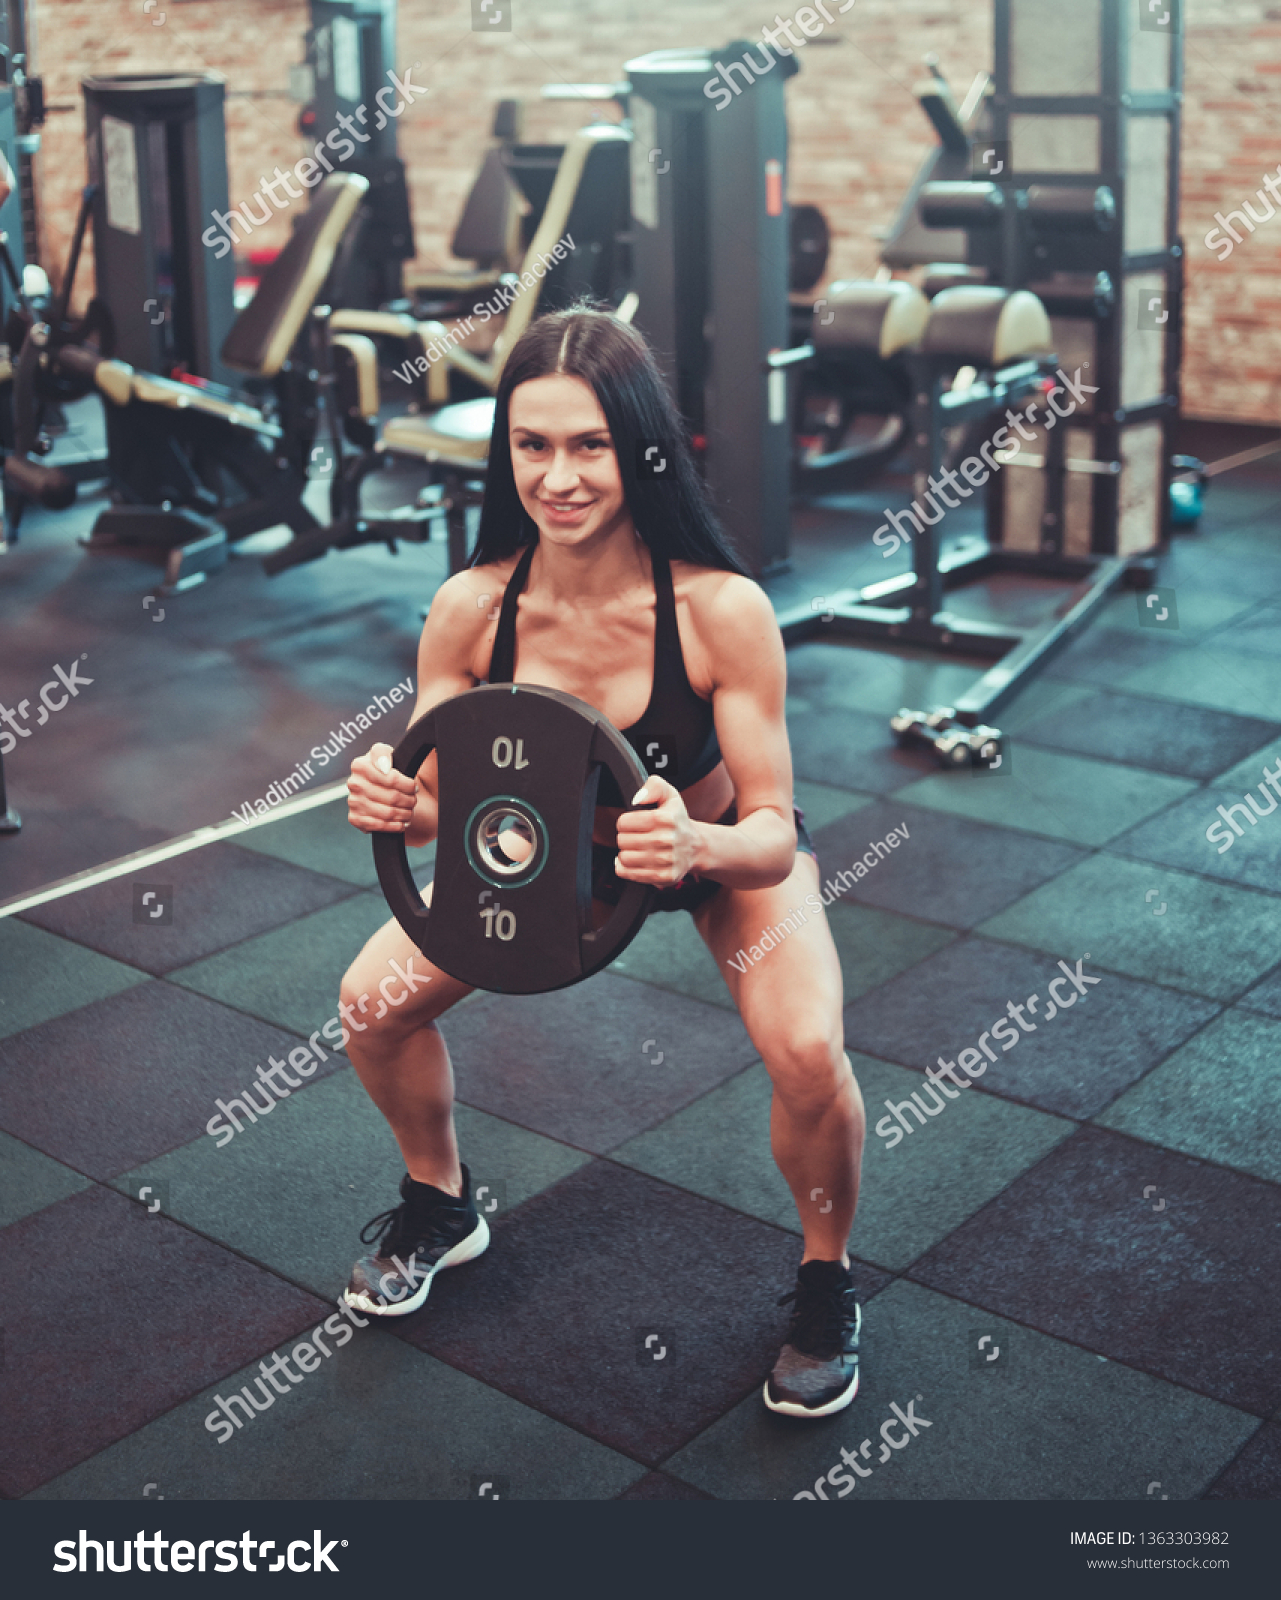 Sexy Fitness Model Doing Squat Exercise Stock Photo Shutterstock